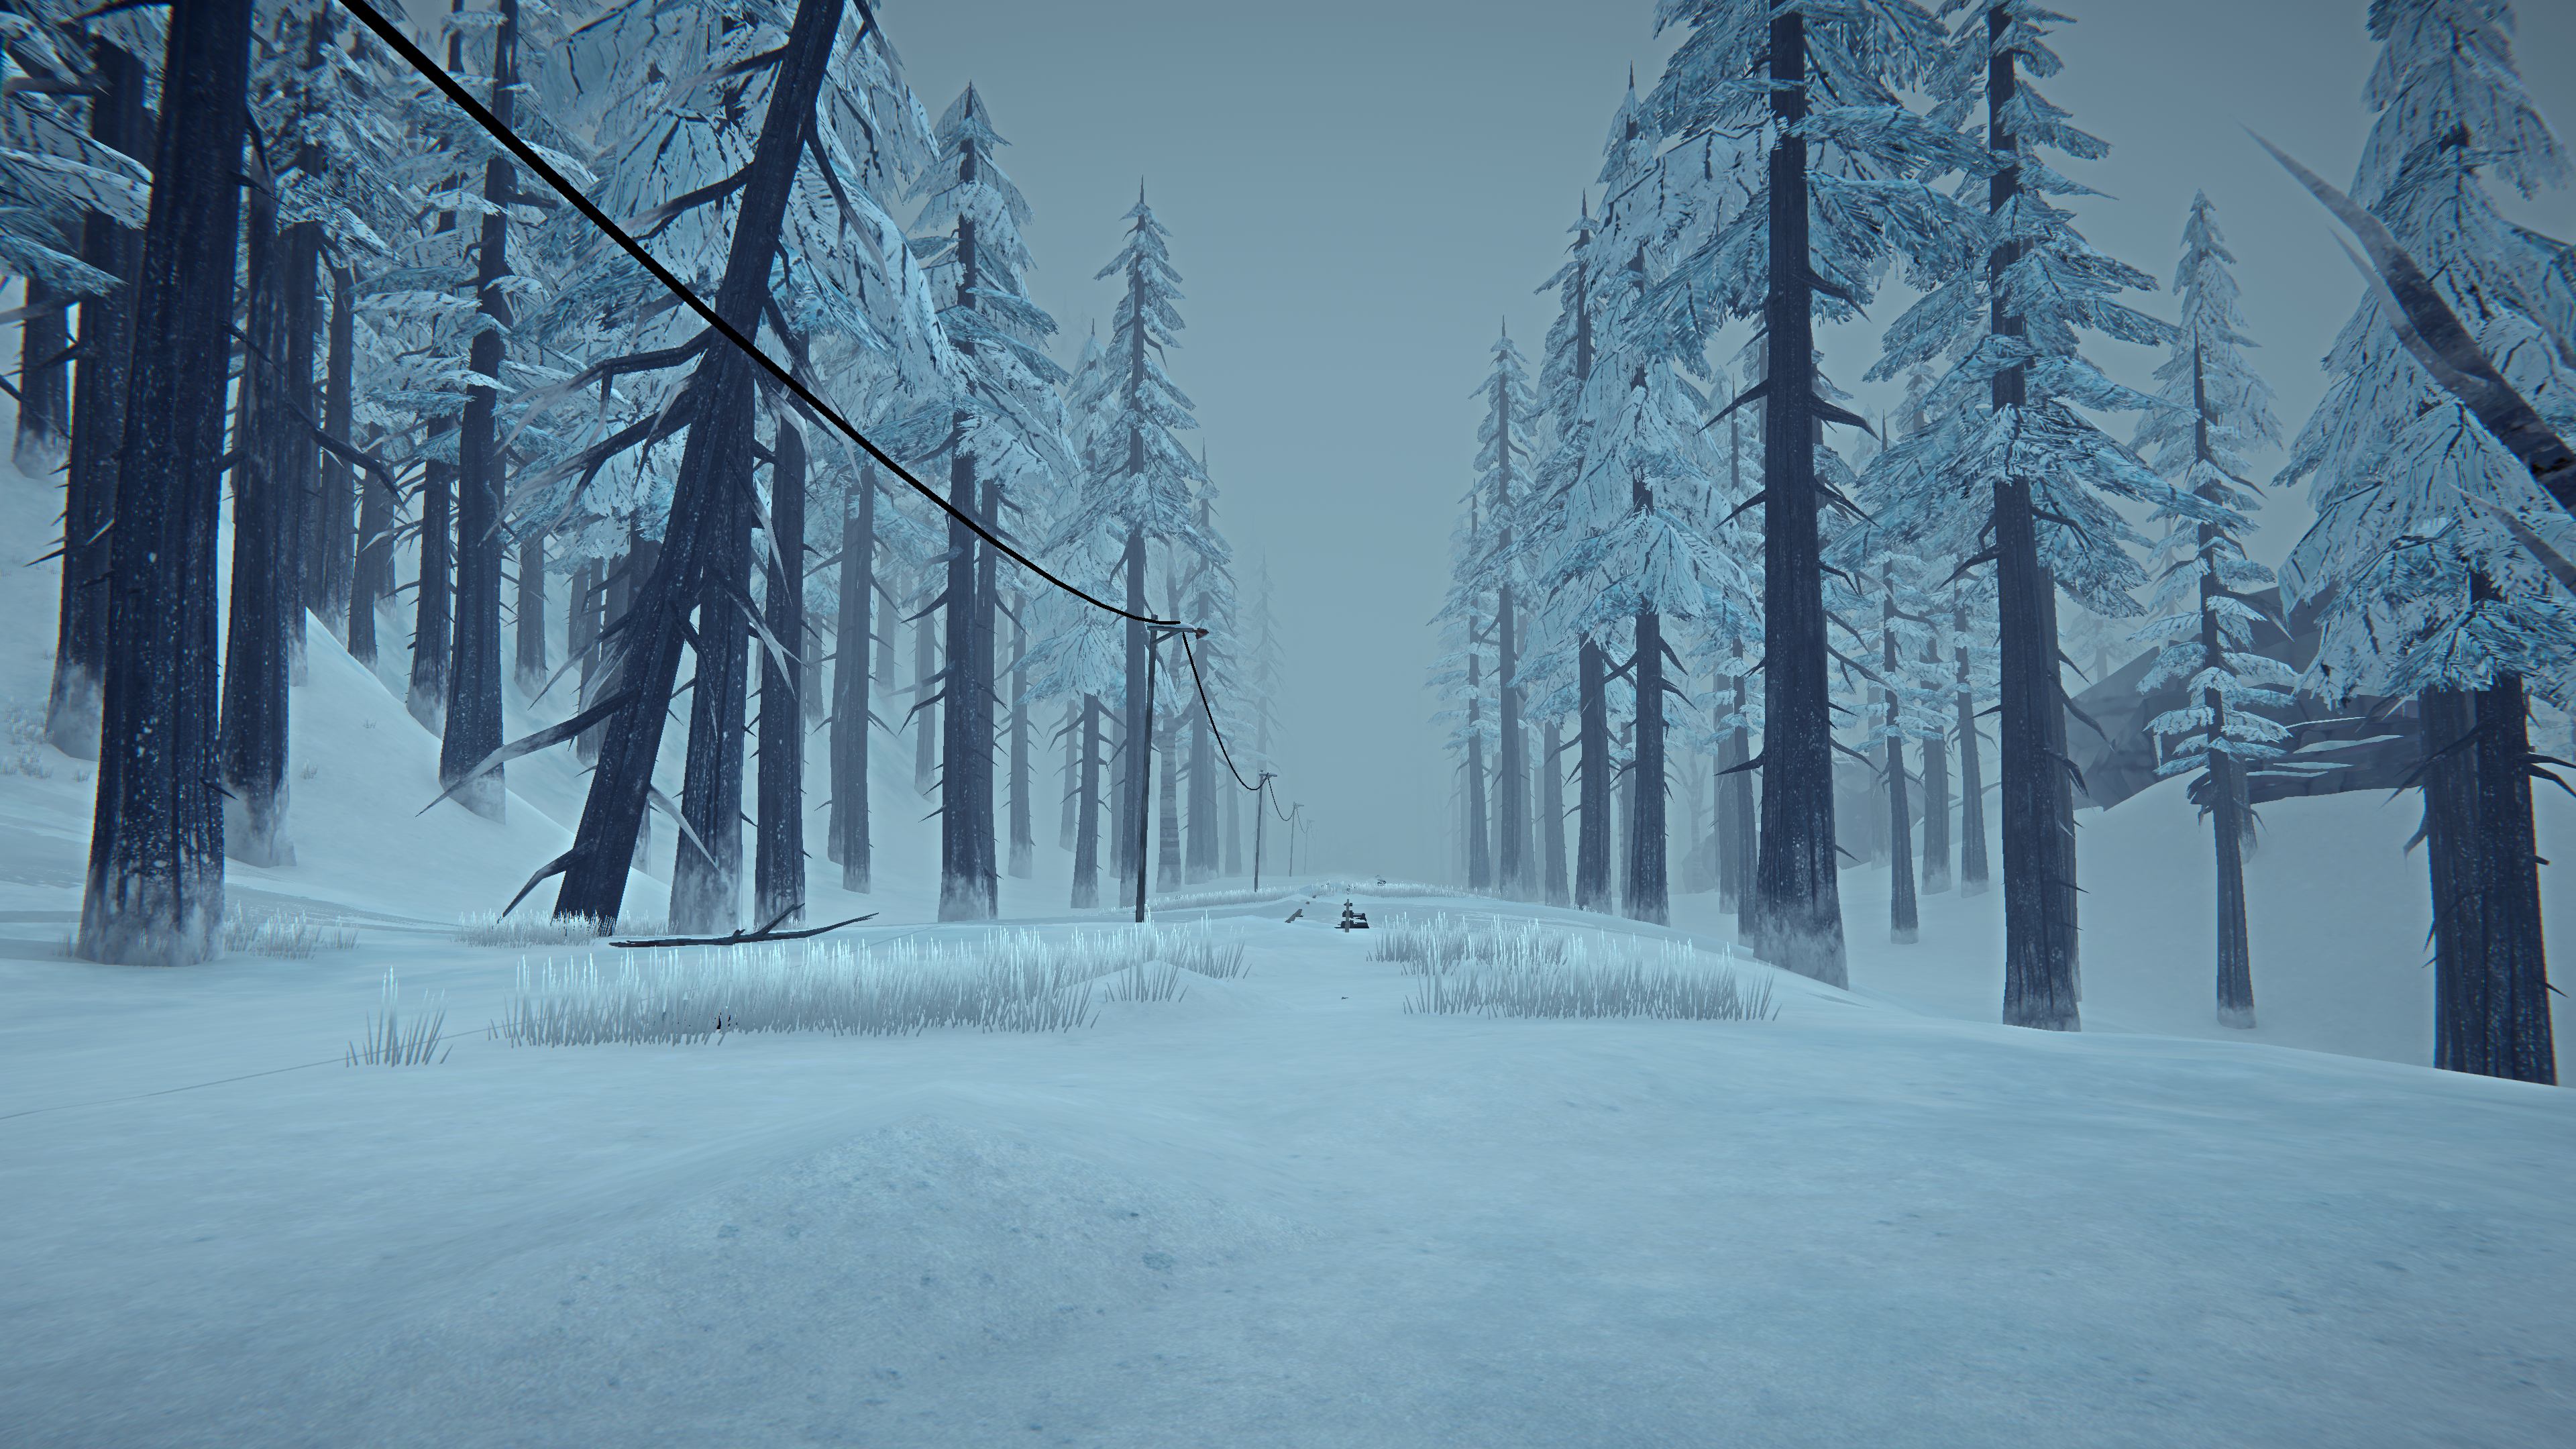 The Long Dark Screen Shot Snow Survival Video Game Landscape PC Gaming Forest Winter Trees Nature Mi 3840x2160